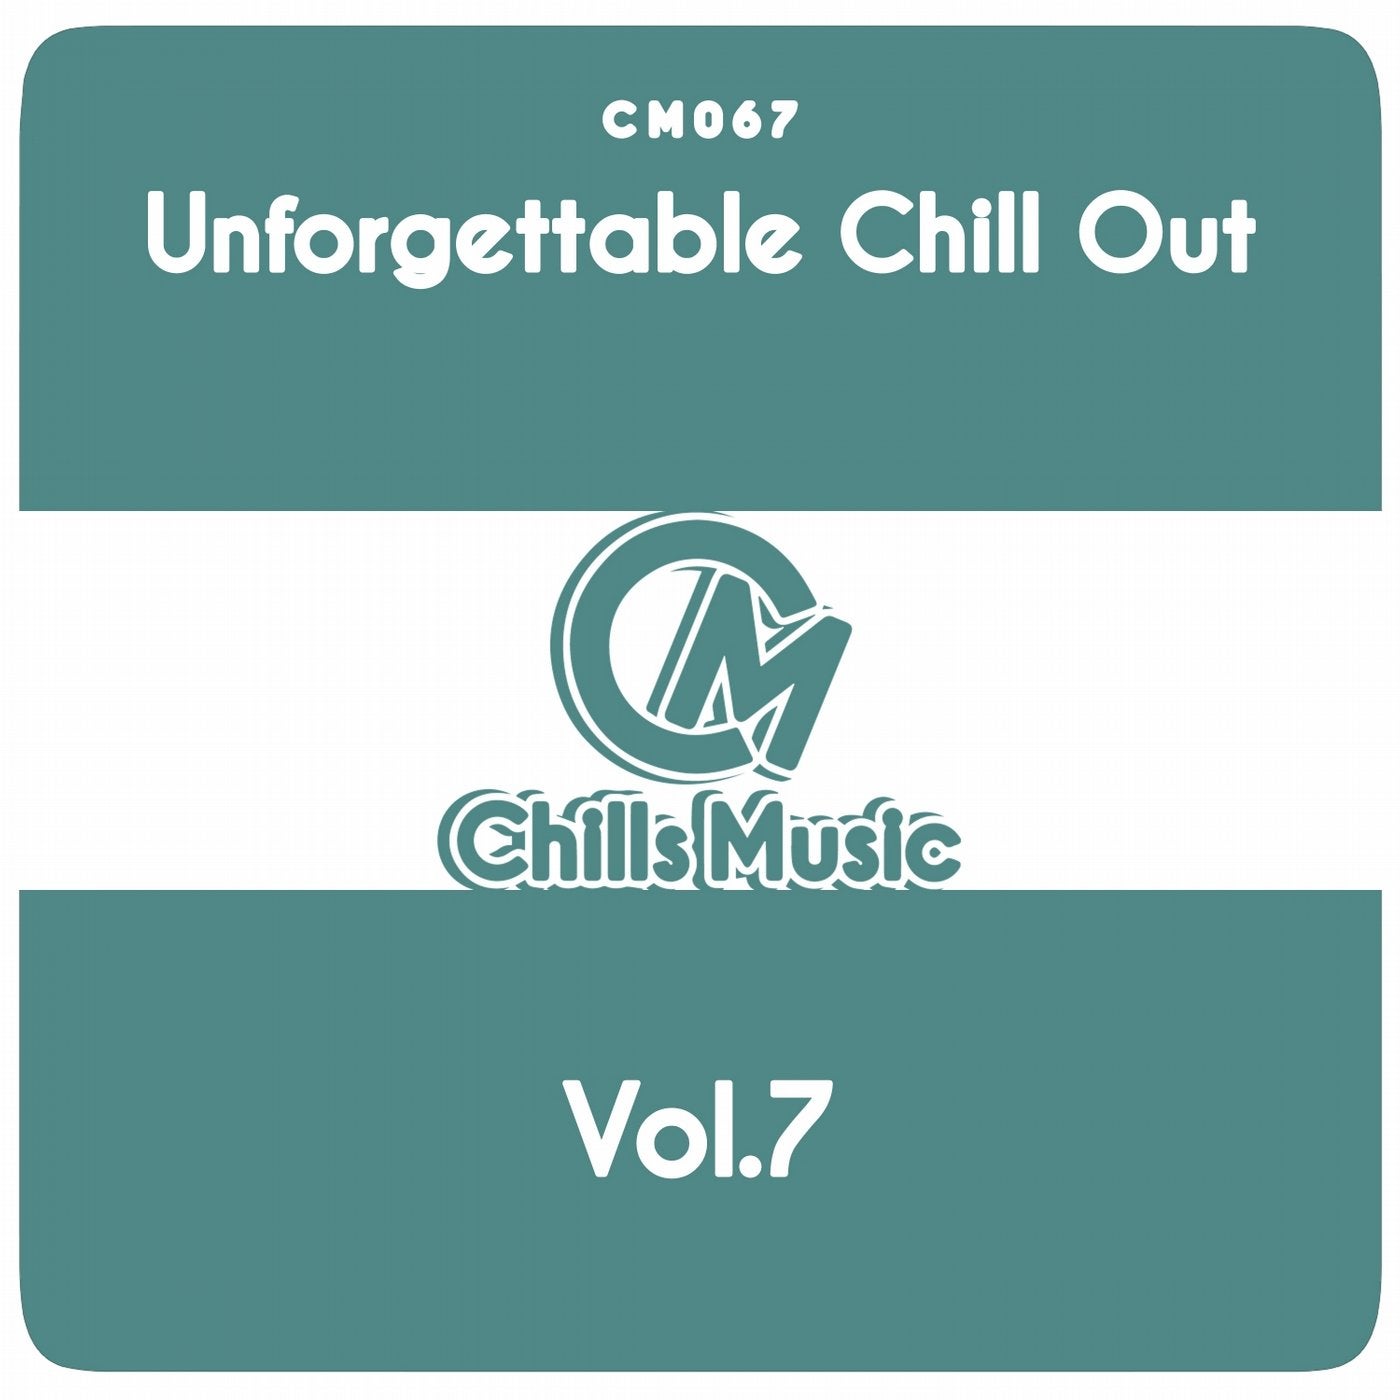 Unforgettable Chill Out, Vol. 7